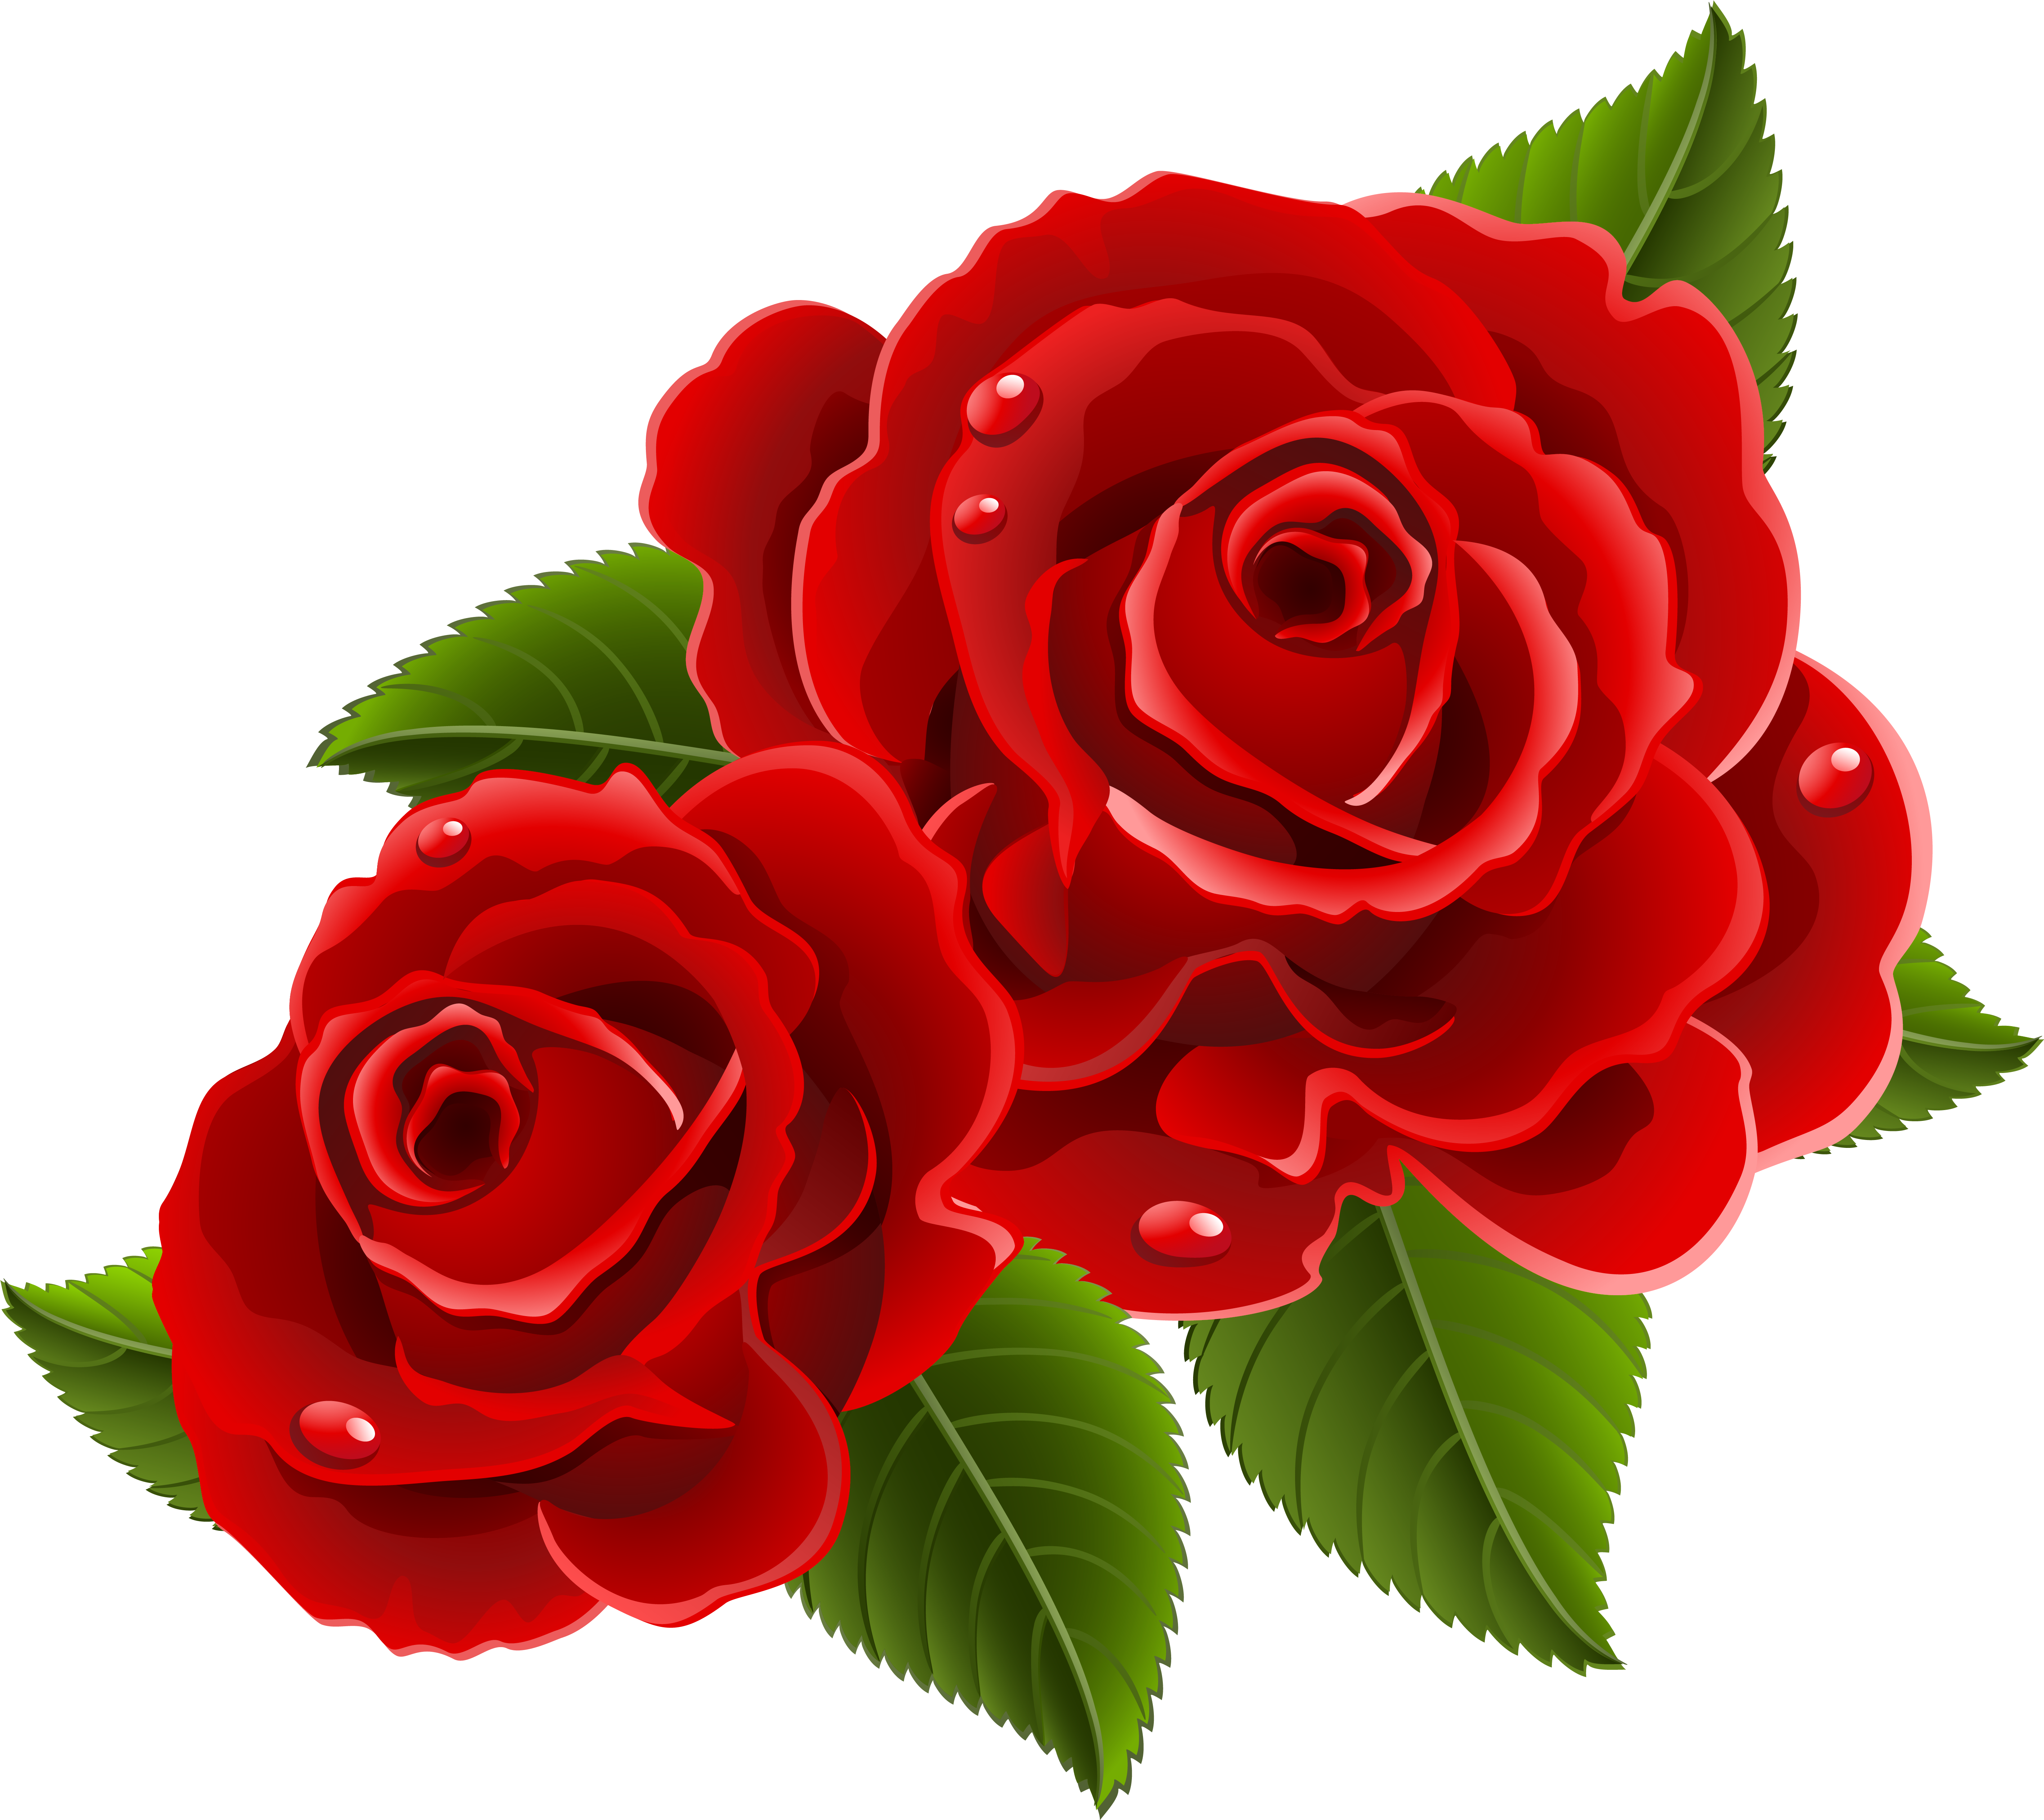 Beautiful Clipart Red Rose - Beautiful Red Rose Flowers - Free ...